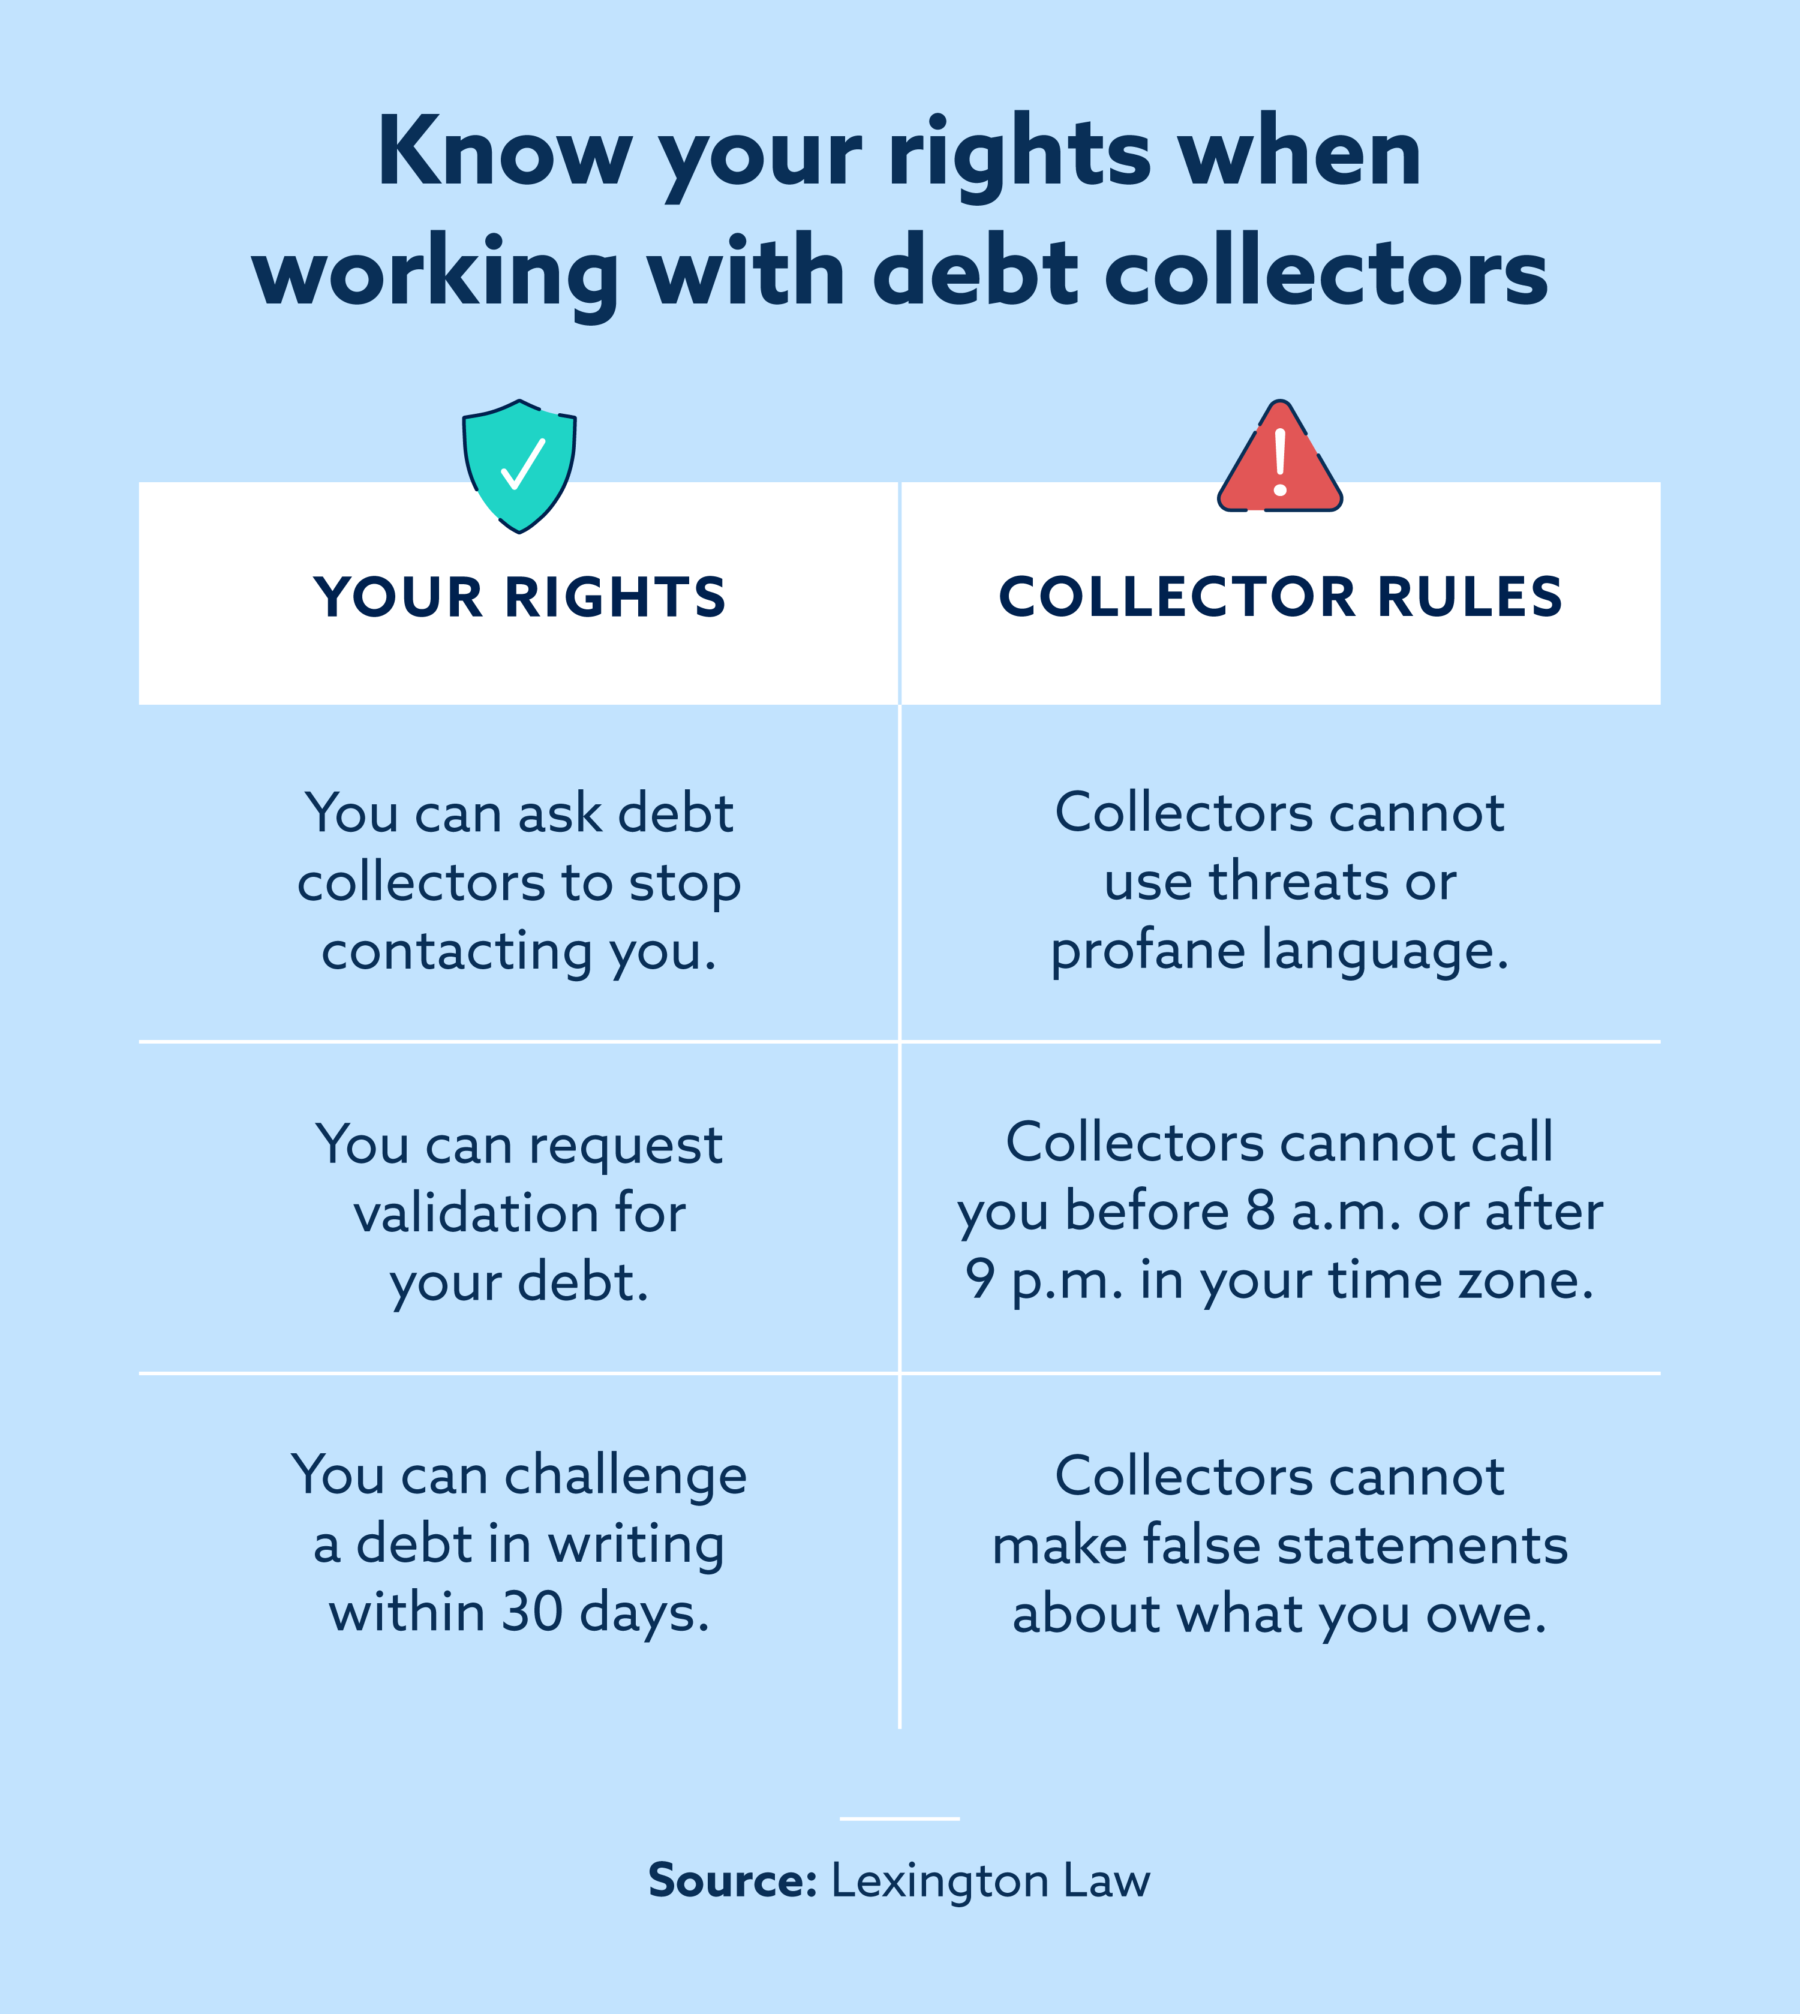 Know your rights when working with debt collectors.